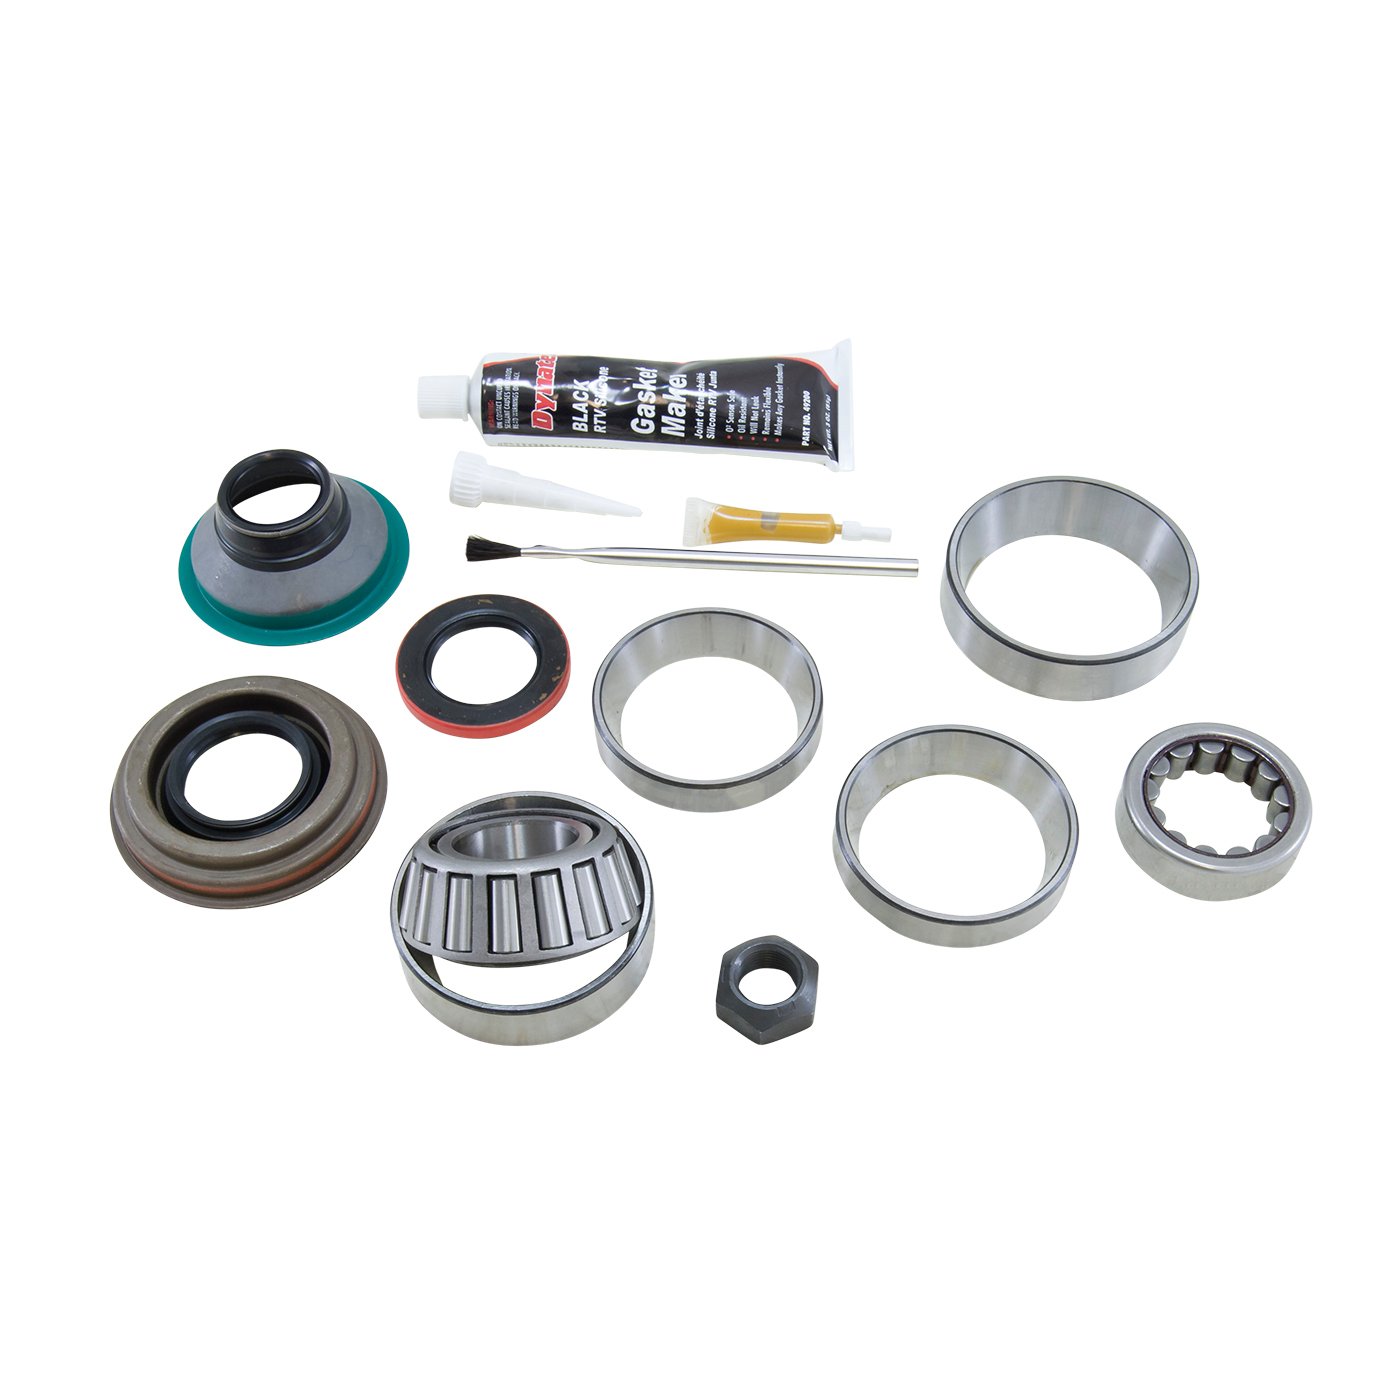 Bearing Install Kit For '92 And Older Dana 44 Ifs Differential